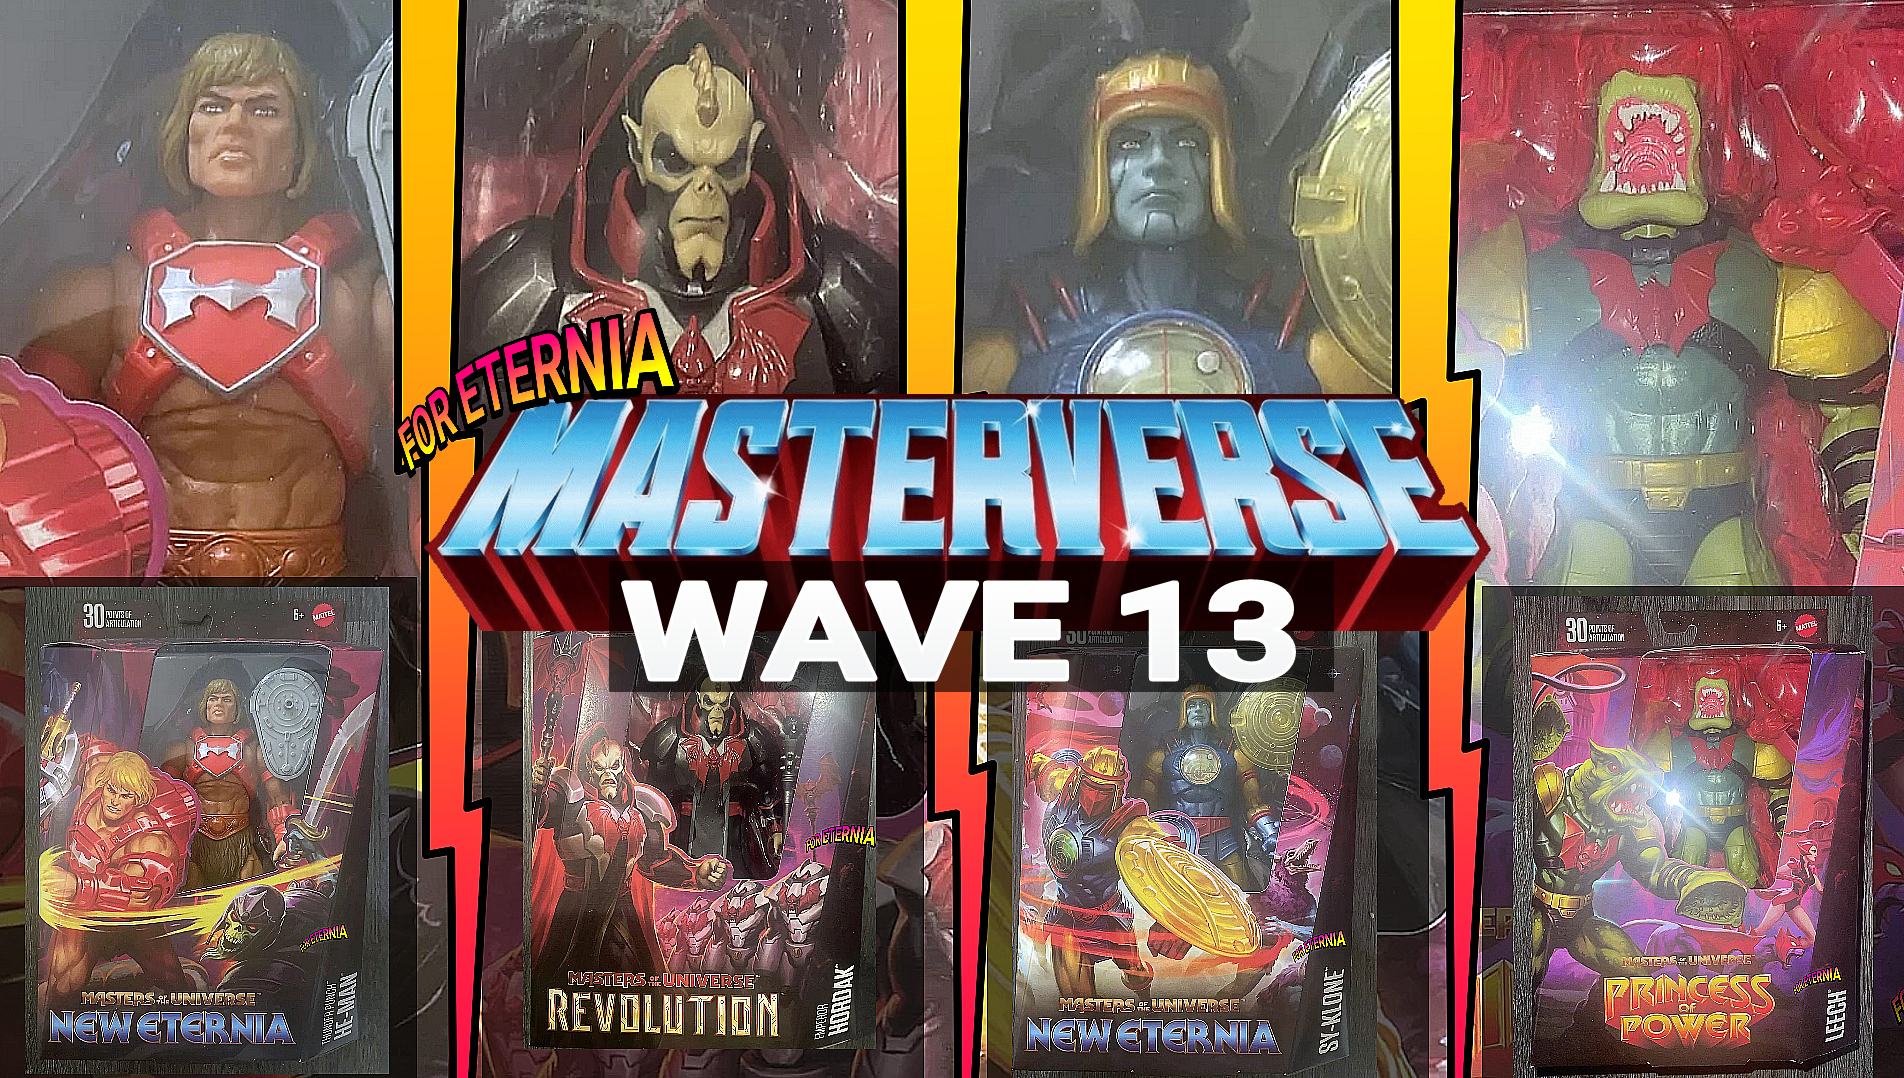 He-Man, Hordak, Sy-Klone and Leech! A look at MASTERVERSE Wave 13 in packaging